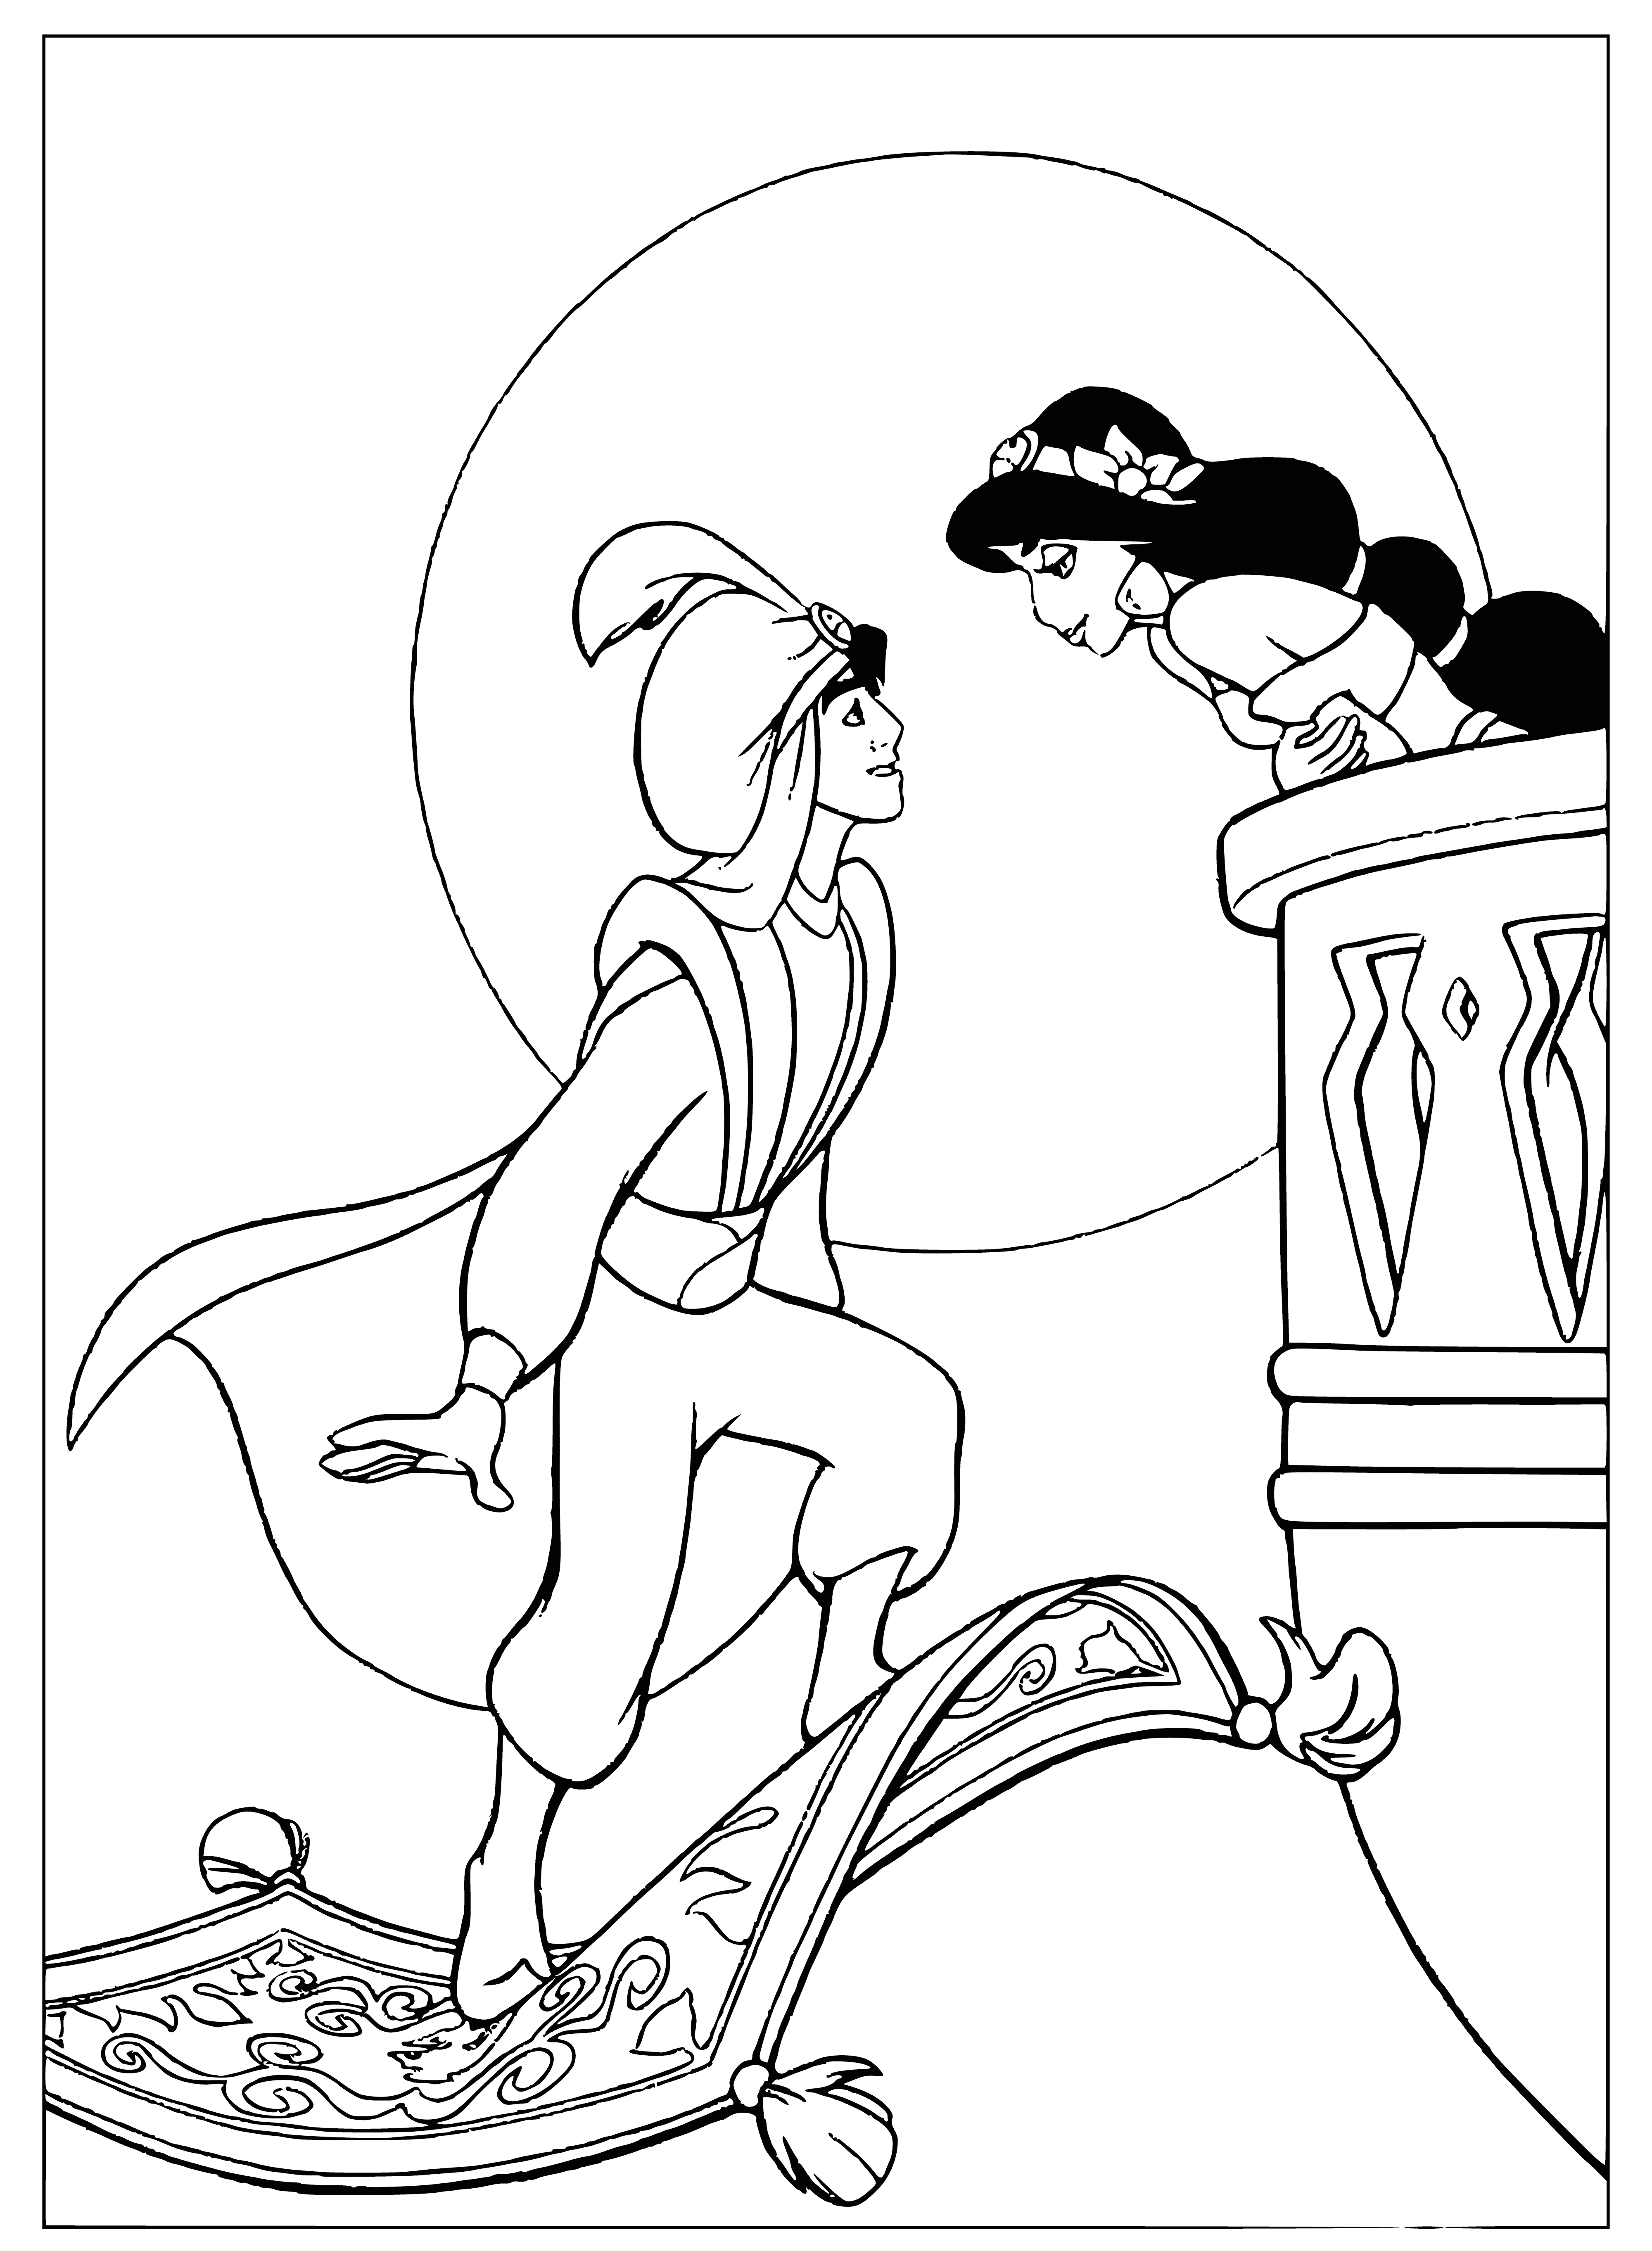 Aladdin on the carpet coloring page